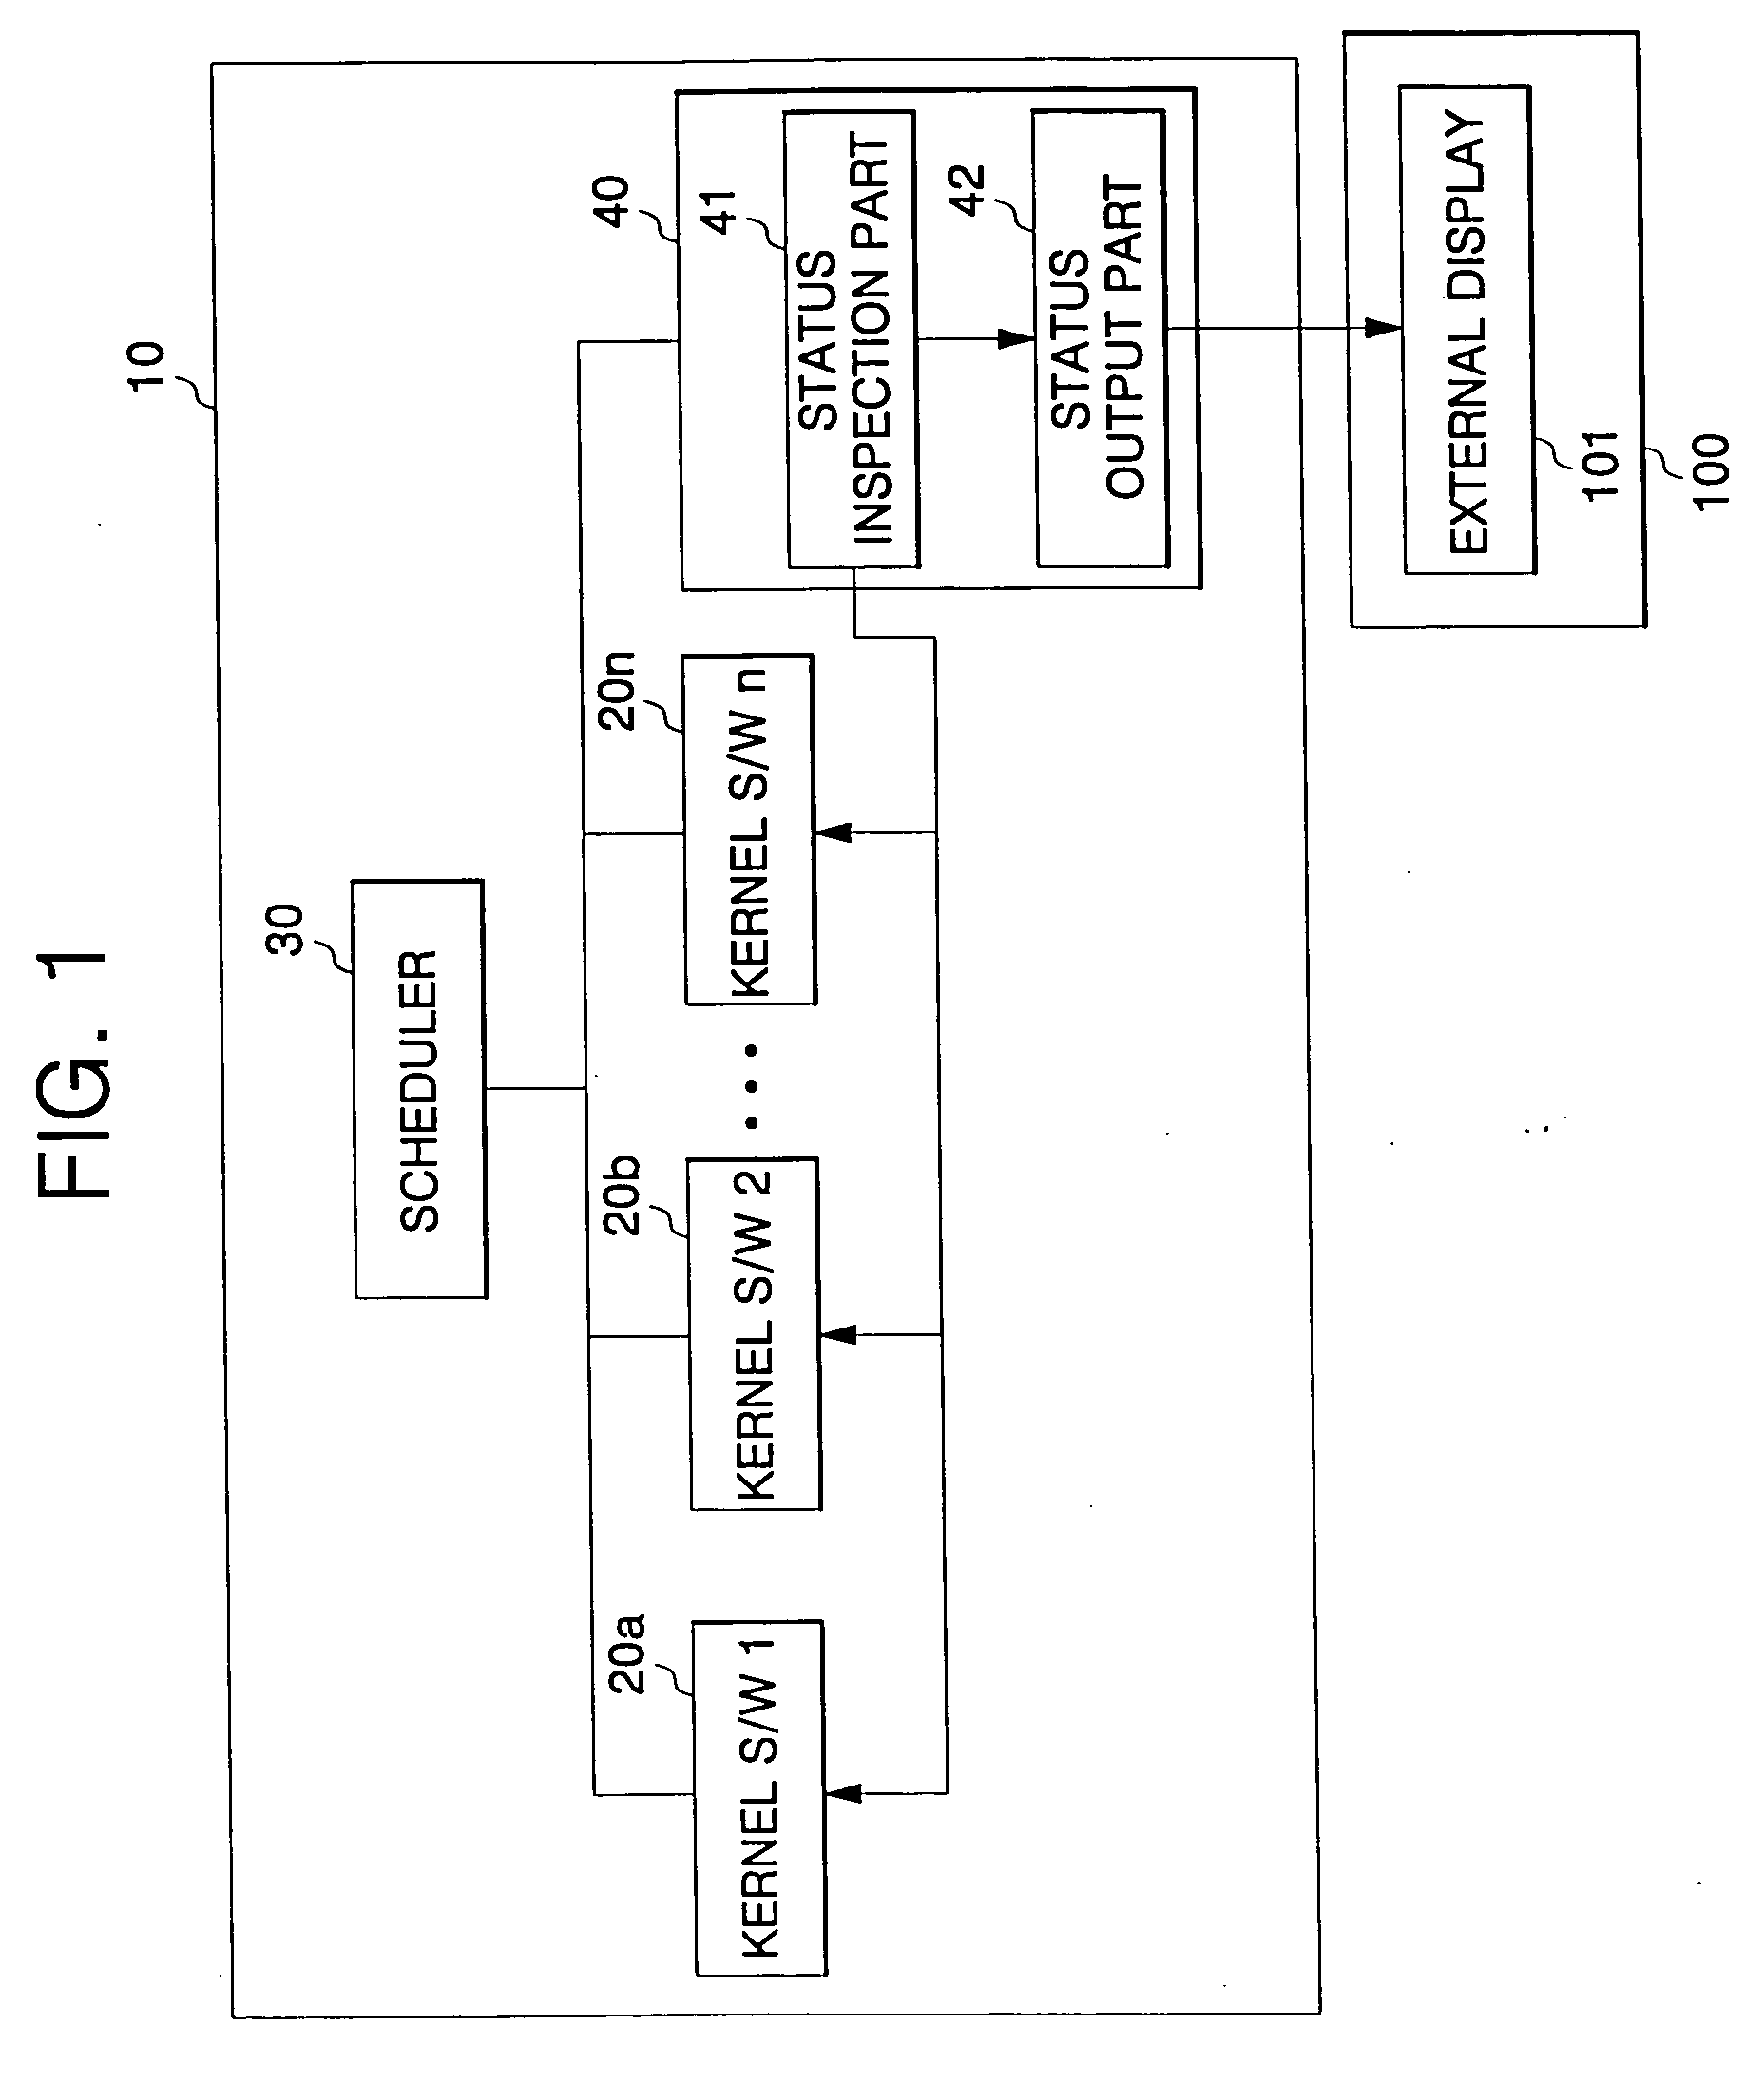 Apparatus and method for monitoring software module state in a system using an embedded multitasking OS